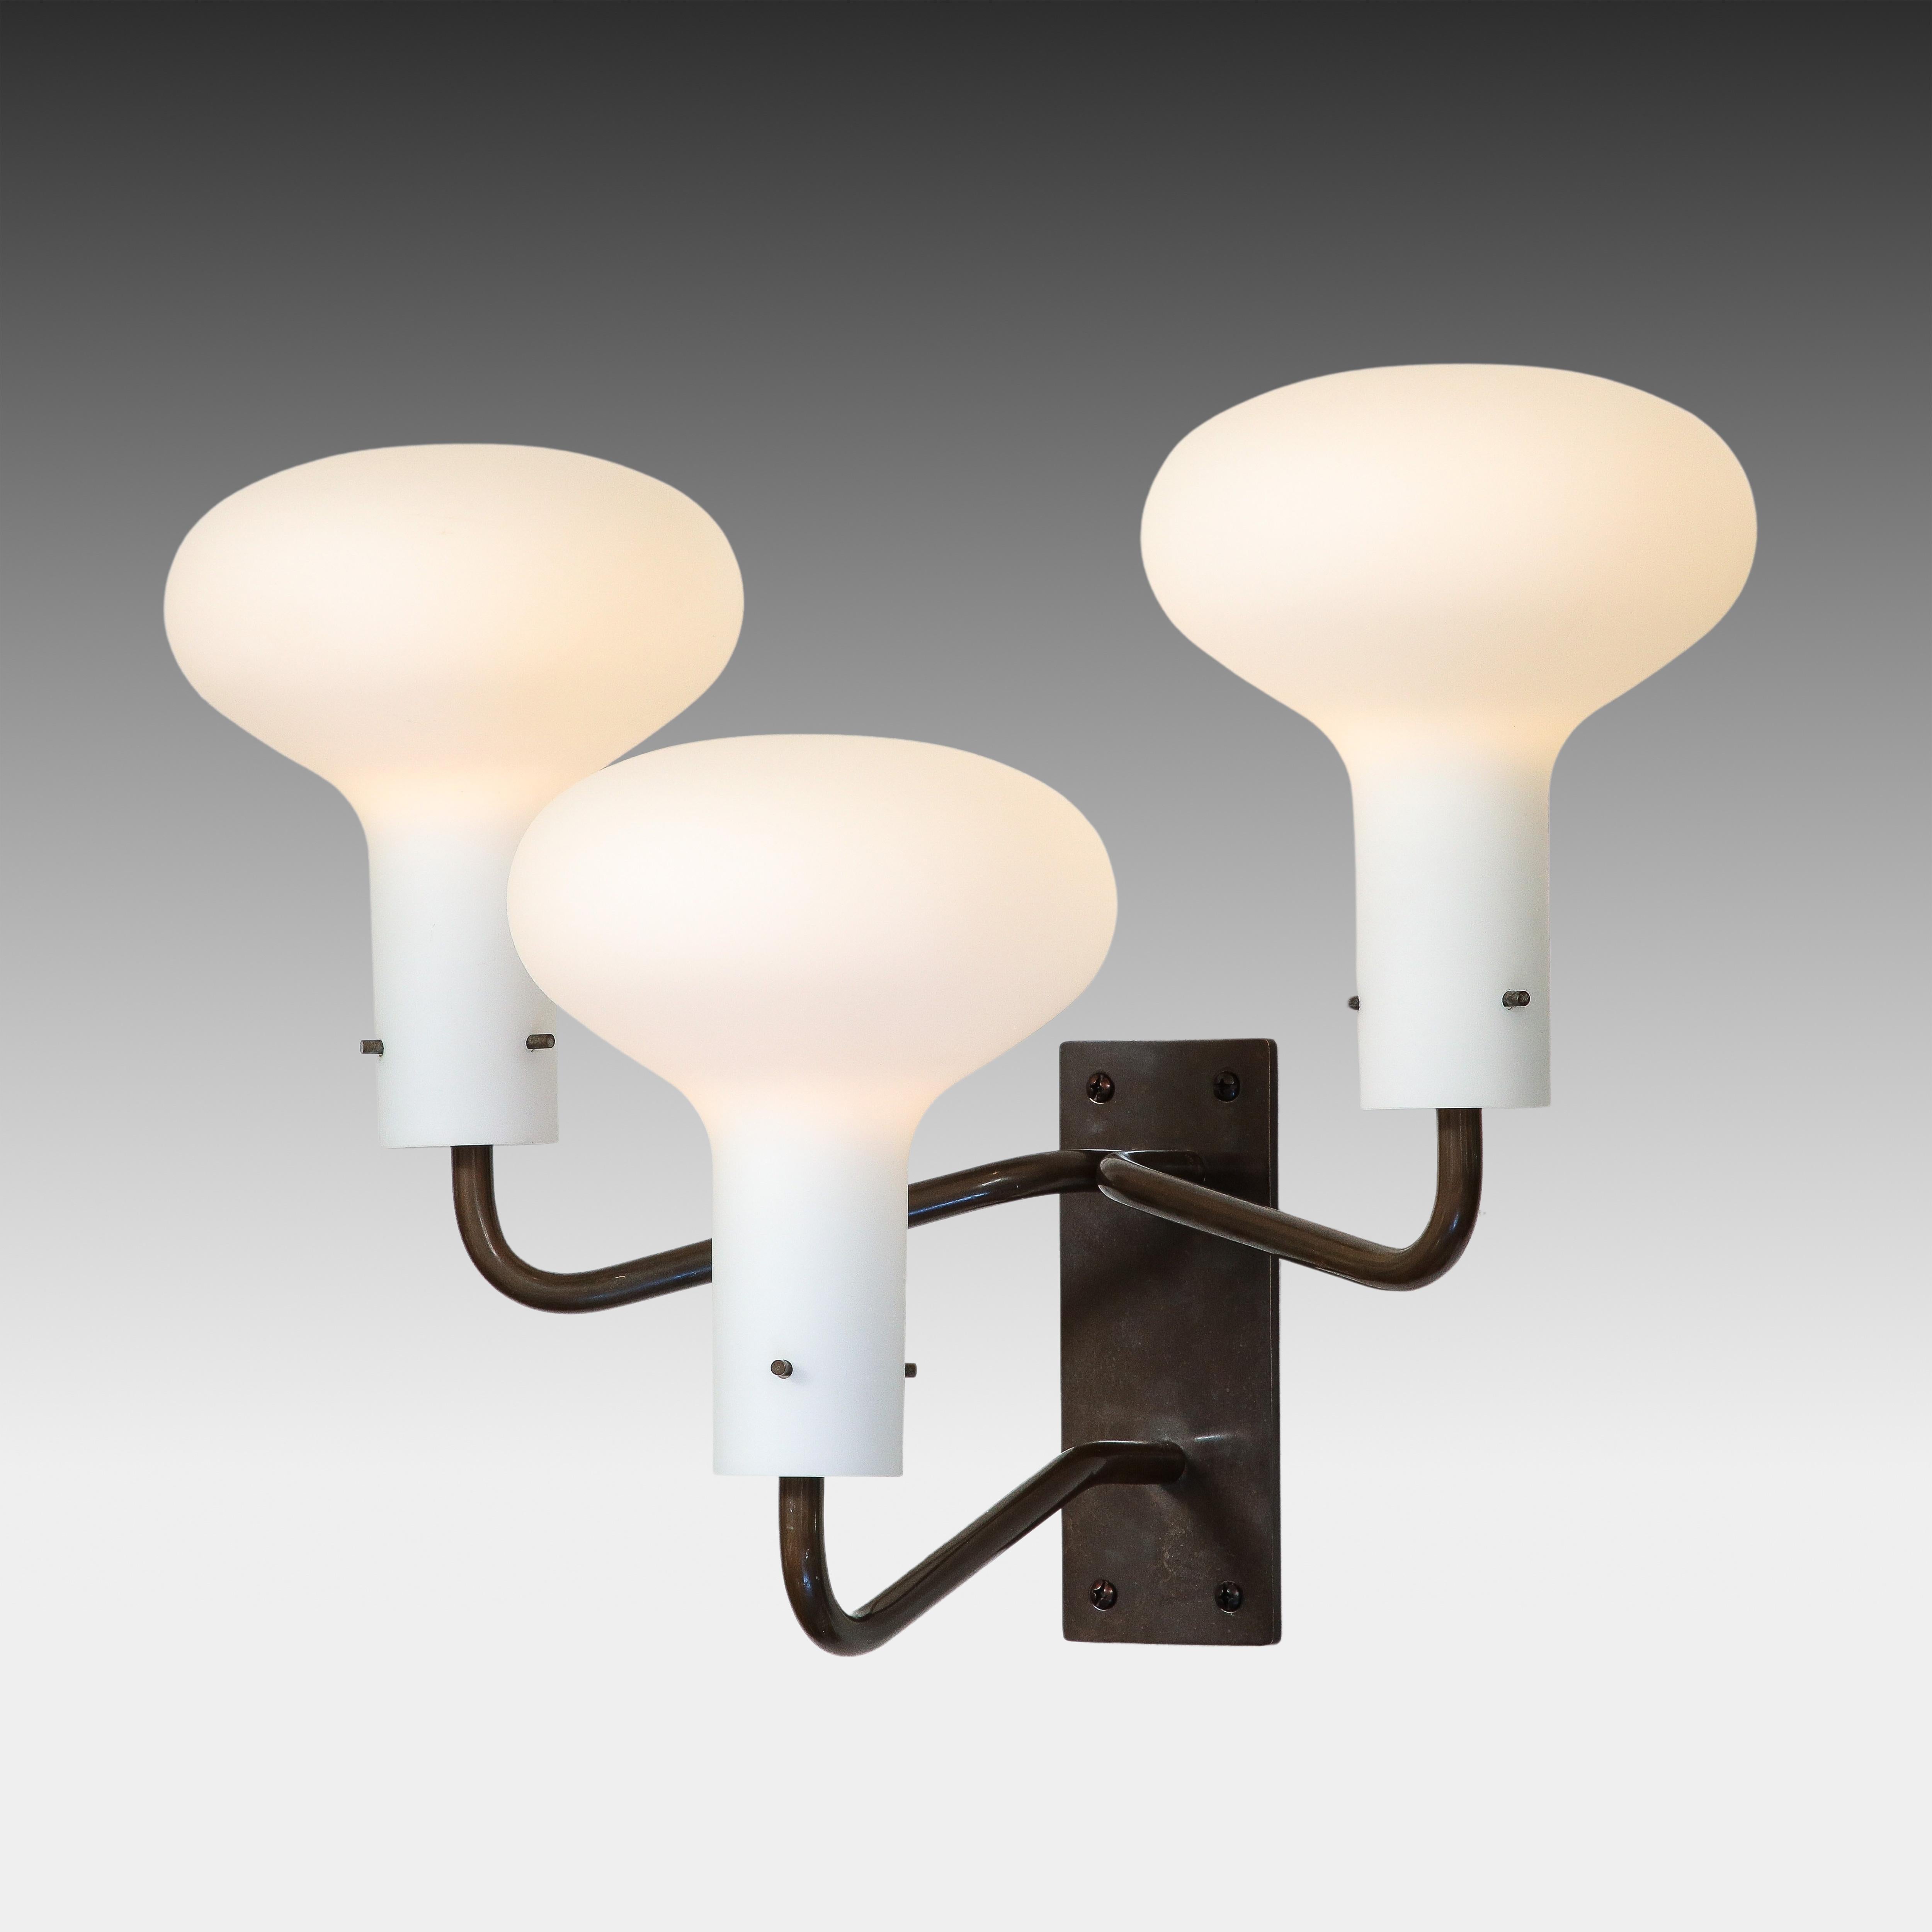 Frosted Ignazio Gardella for Azucena Pair of Three Arm Wall Lights Model LP12, 1950s For Sale